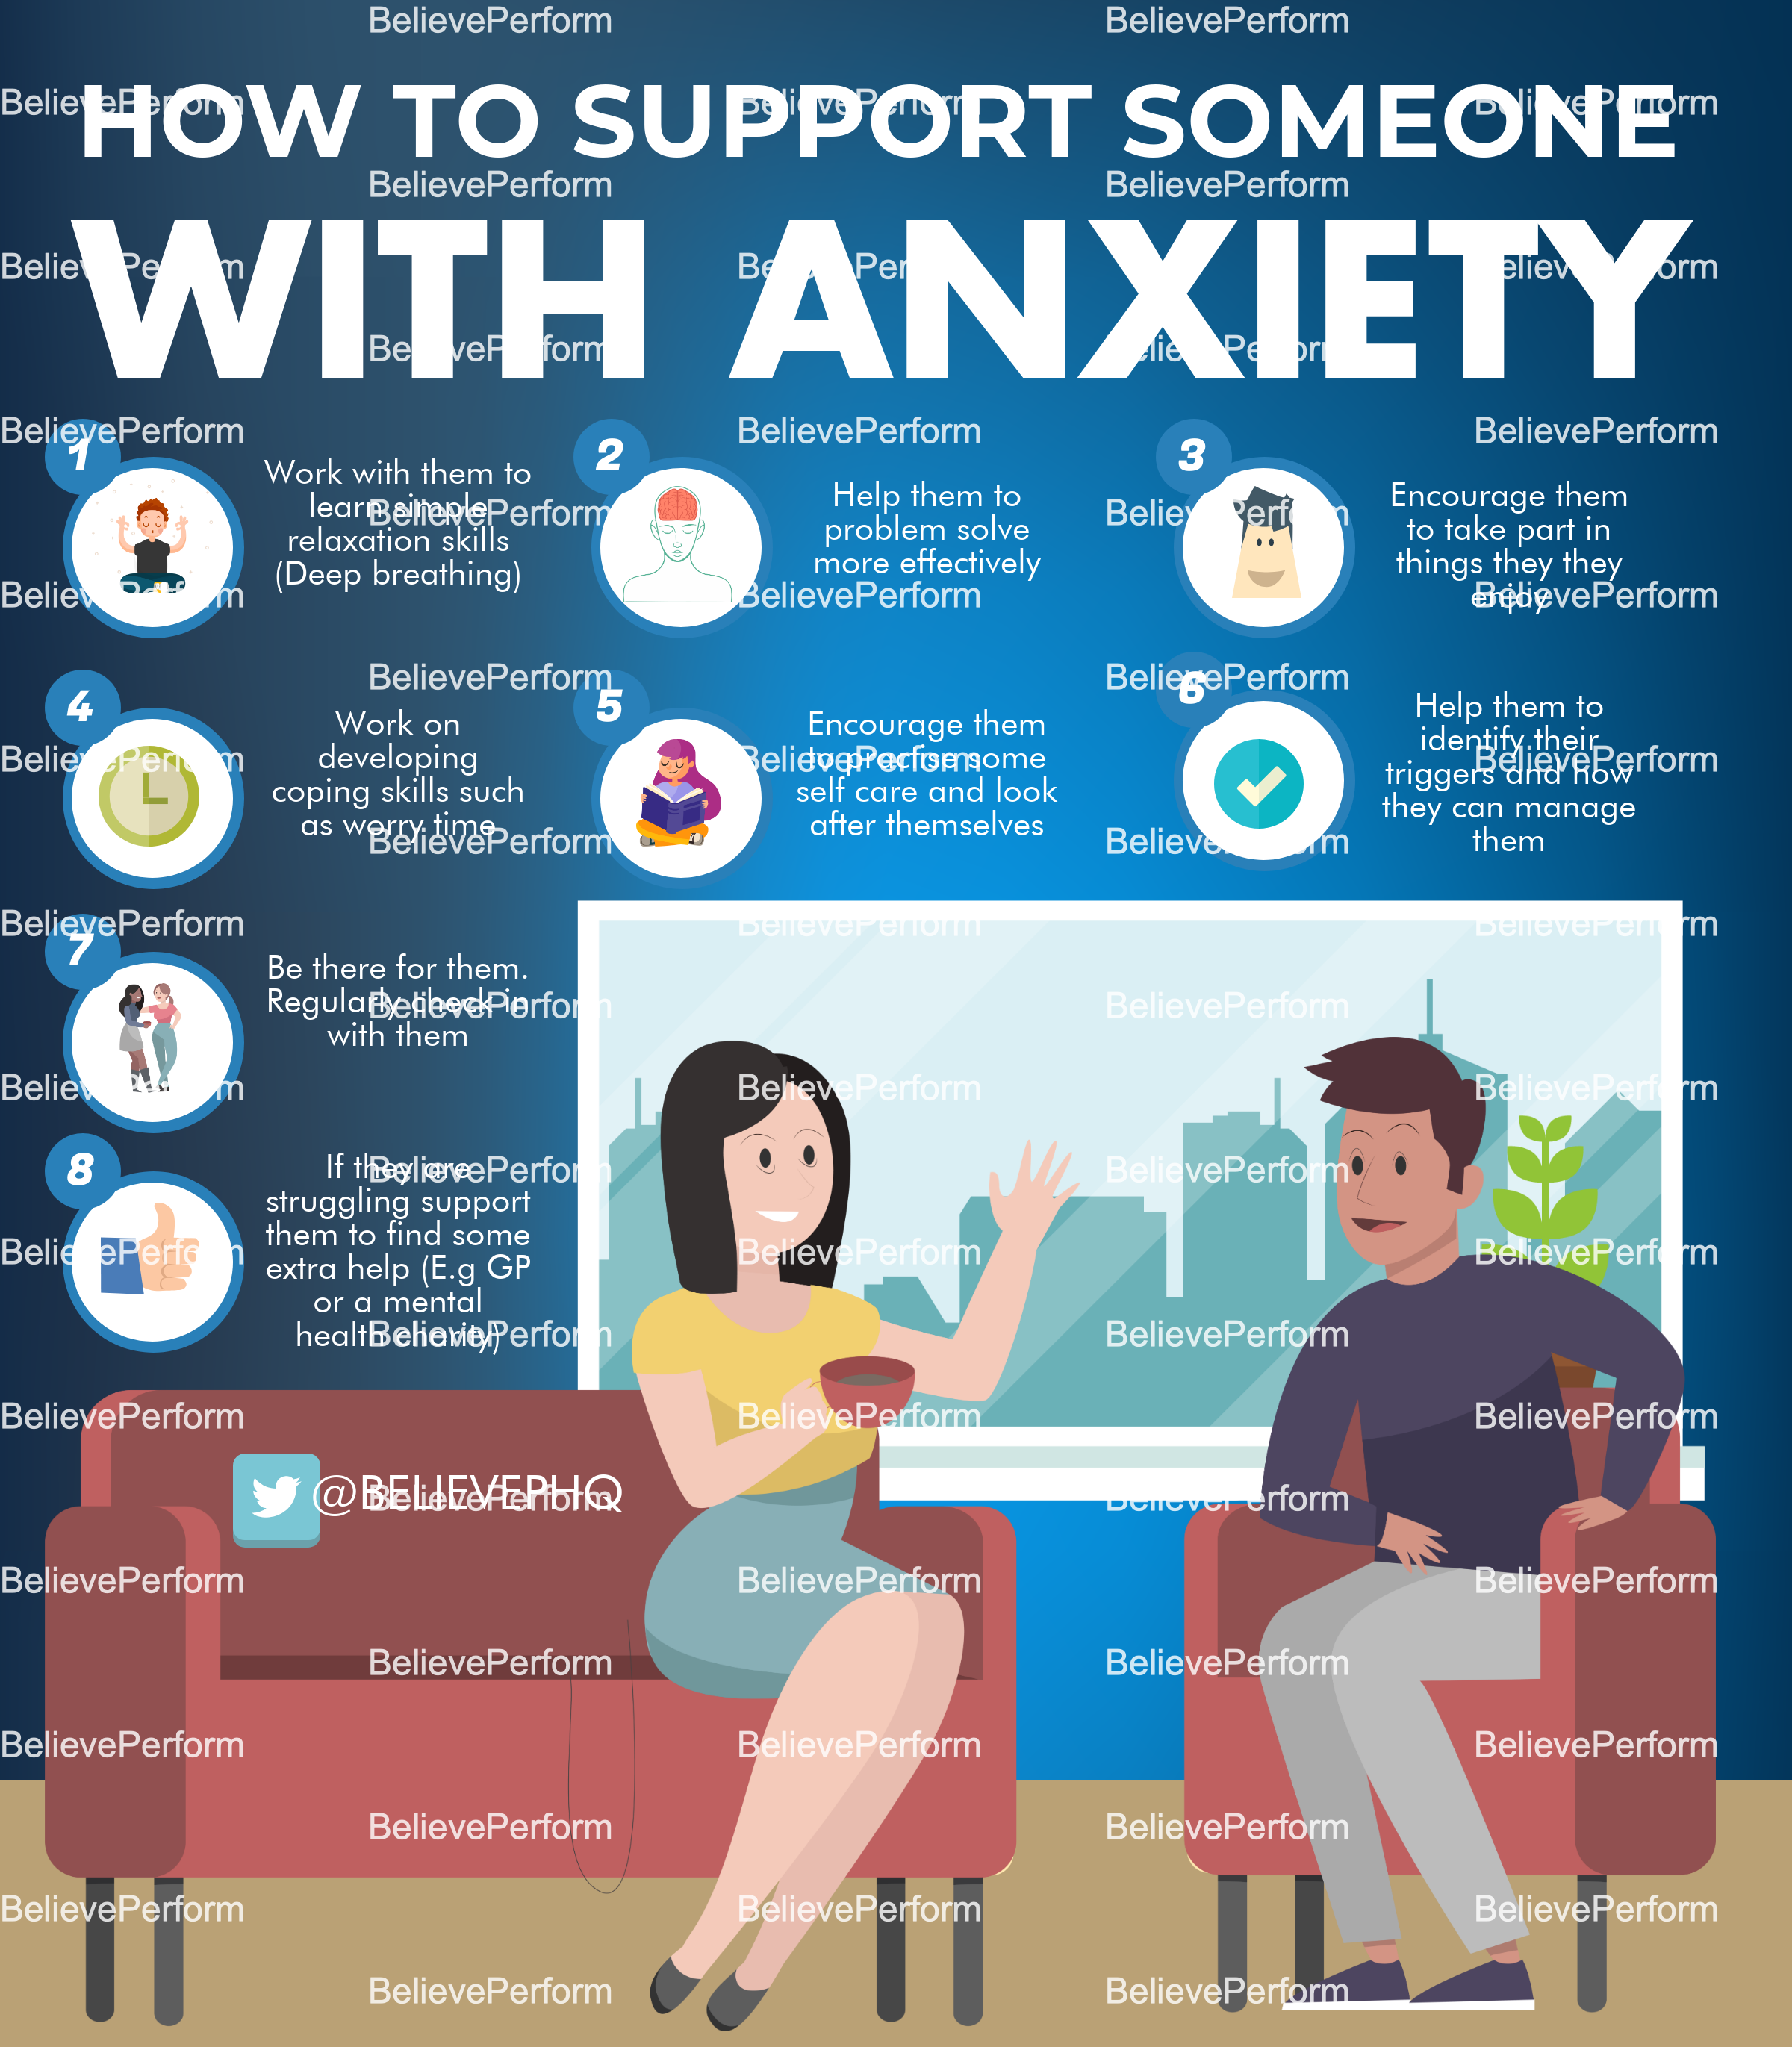 How to support someone with anxiety - BelievePerform - The UK's leading ...